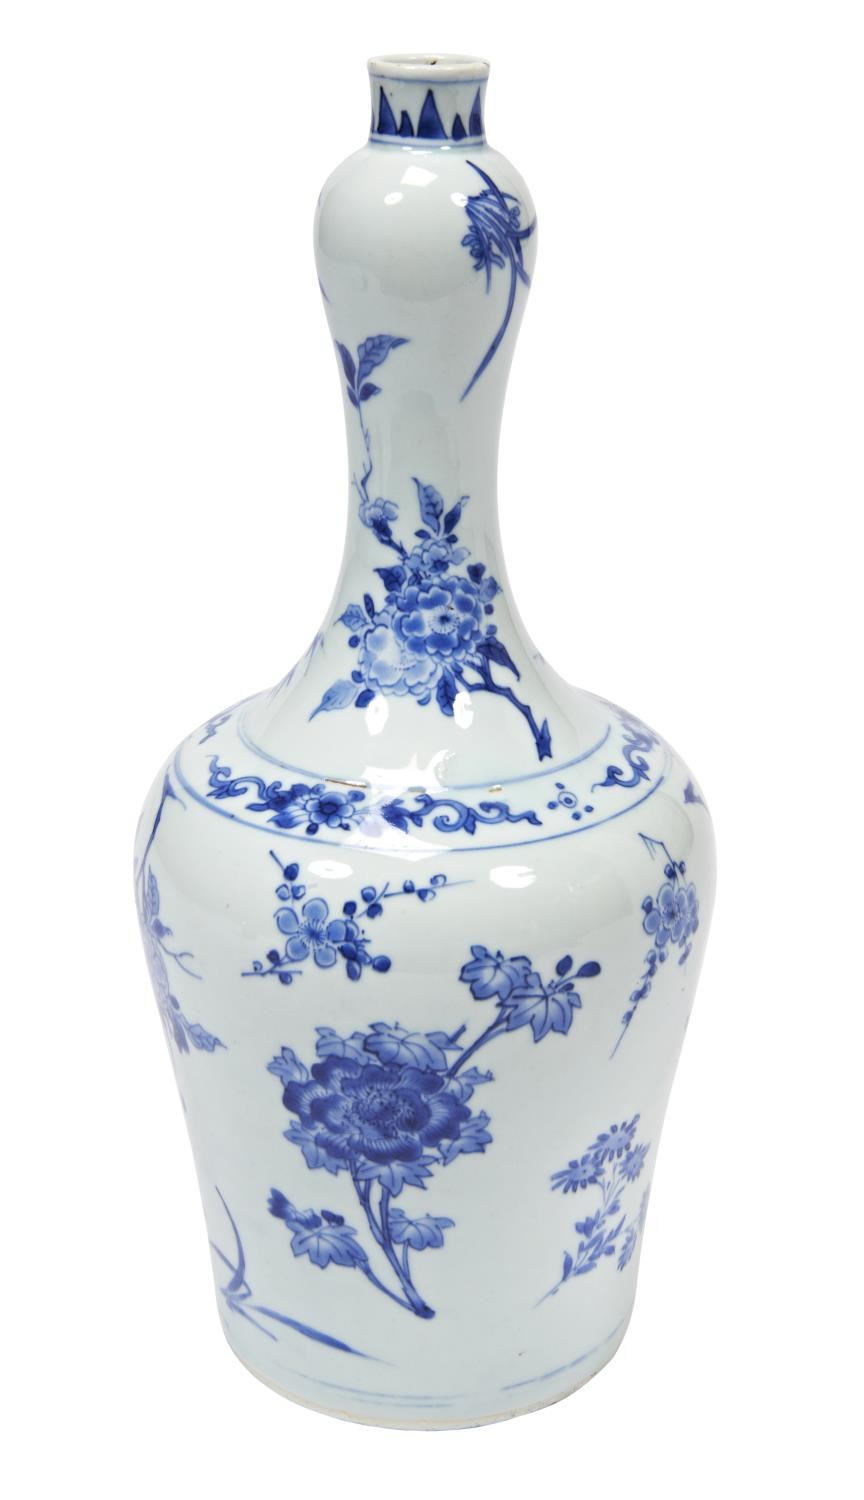 BLUE AND WHITE 'FLORAL' VASE MING DYNASTY, CHONGZHEN PERIOD the tall neck with a garlic mouth, paint